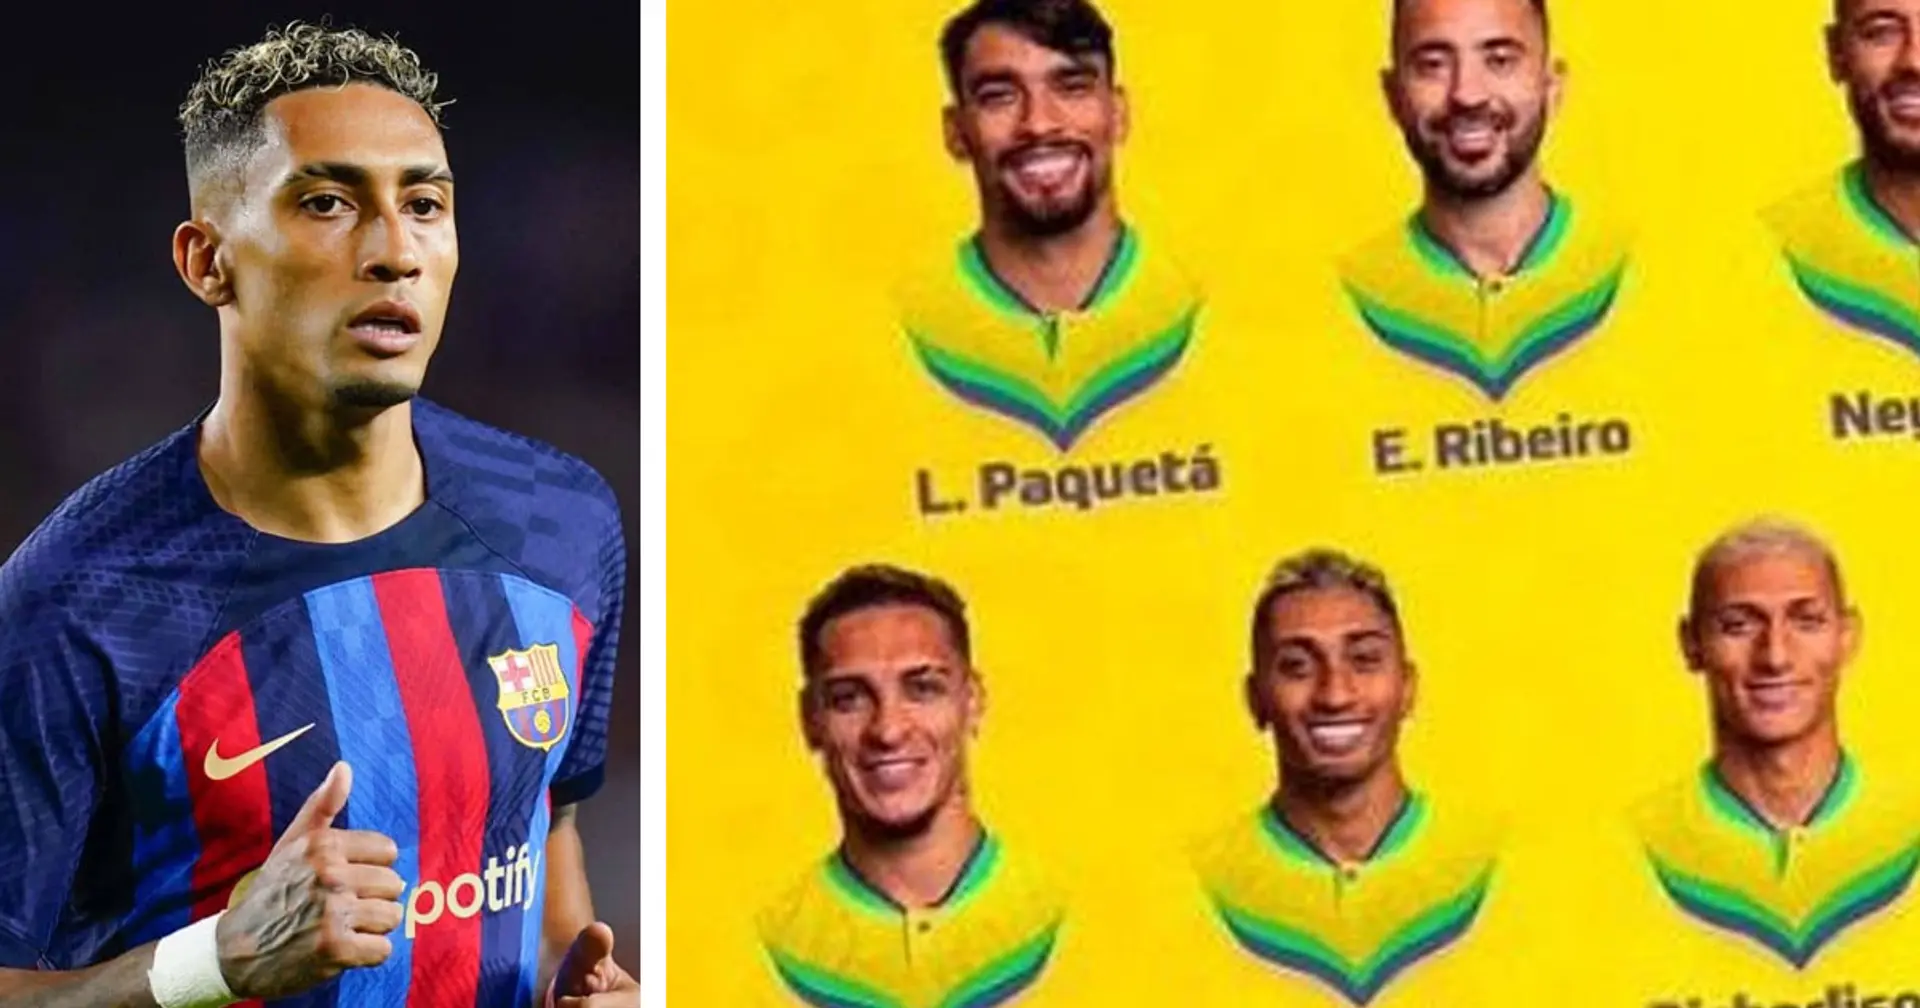 Raphinha included in Brazil's Qatar World Cup squad - 2 ex-Barca stars also named